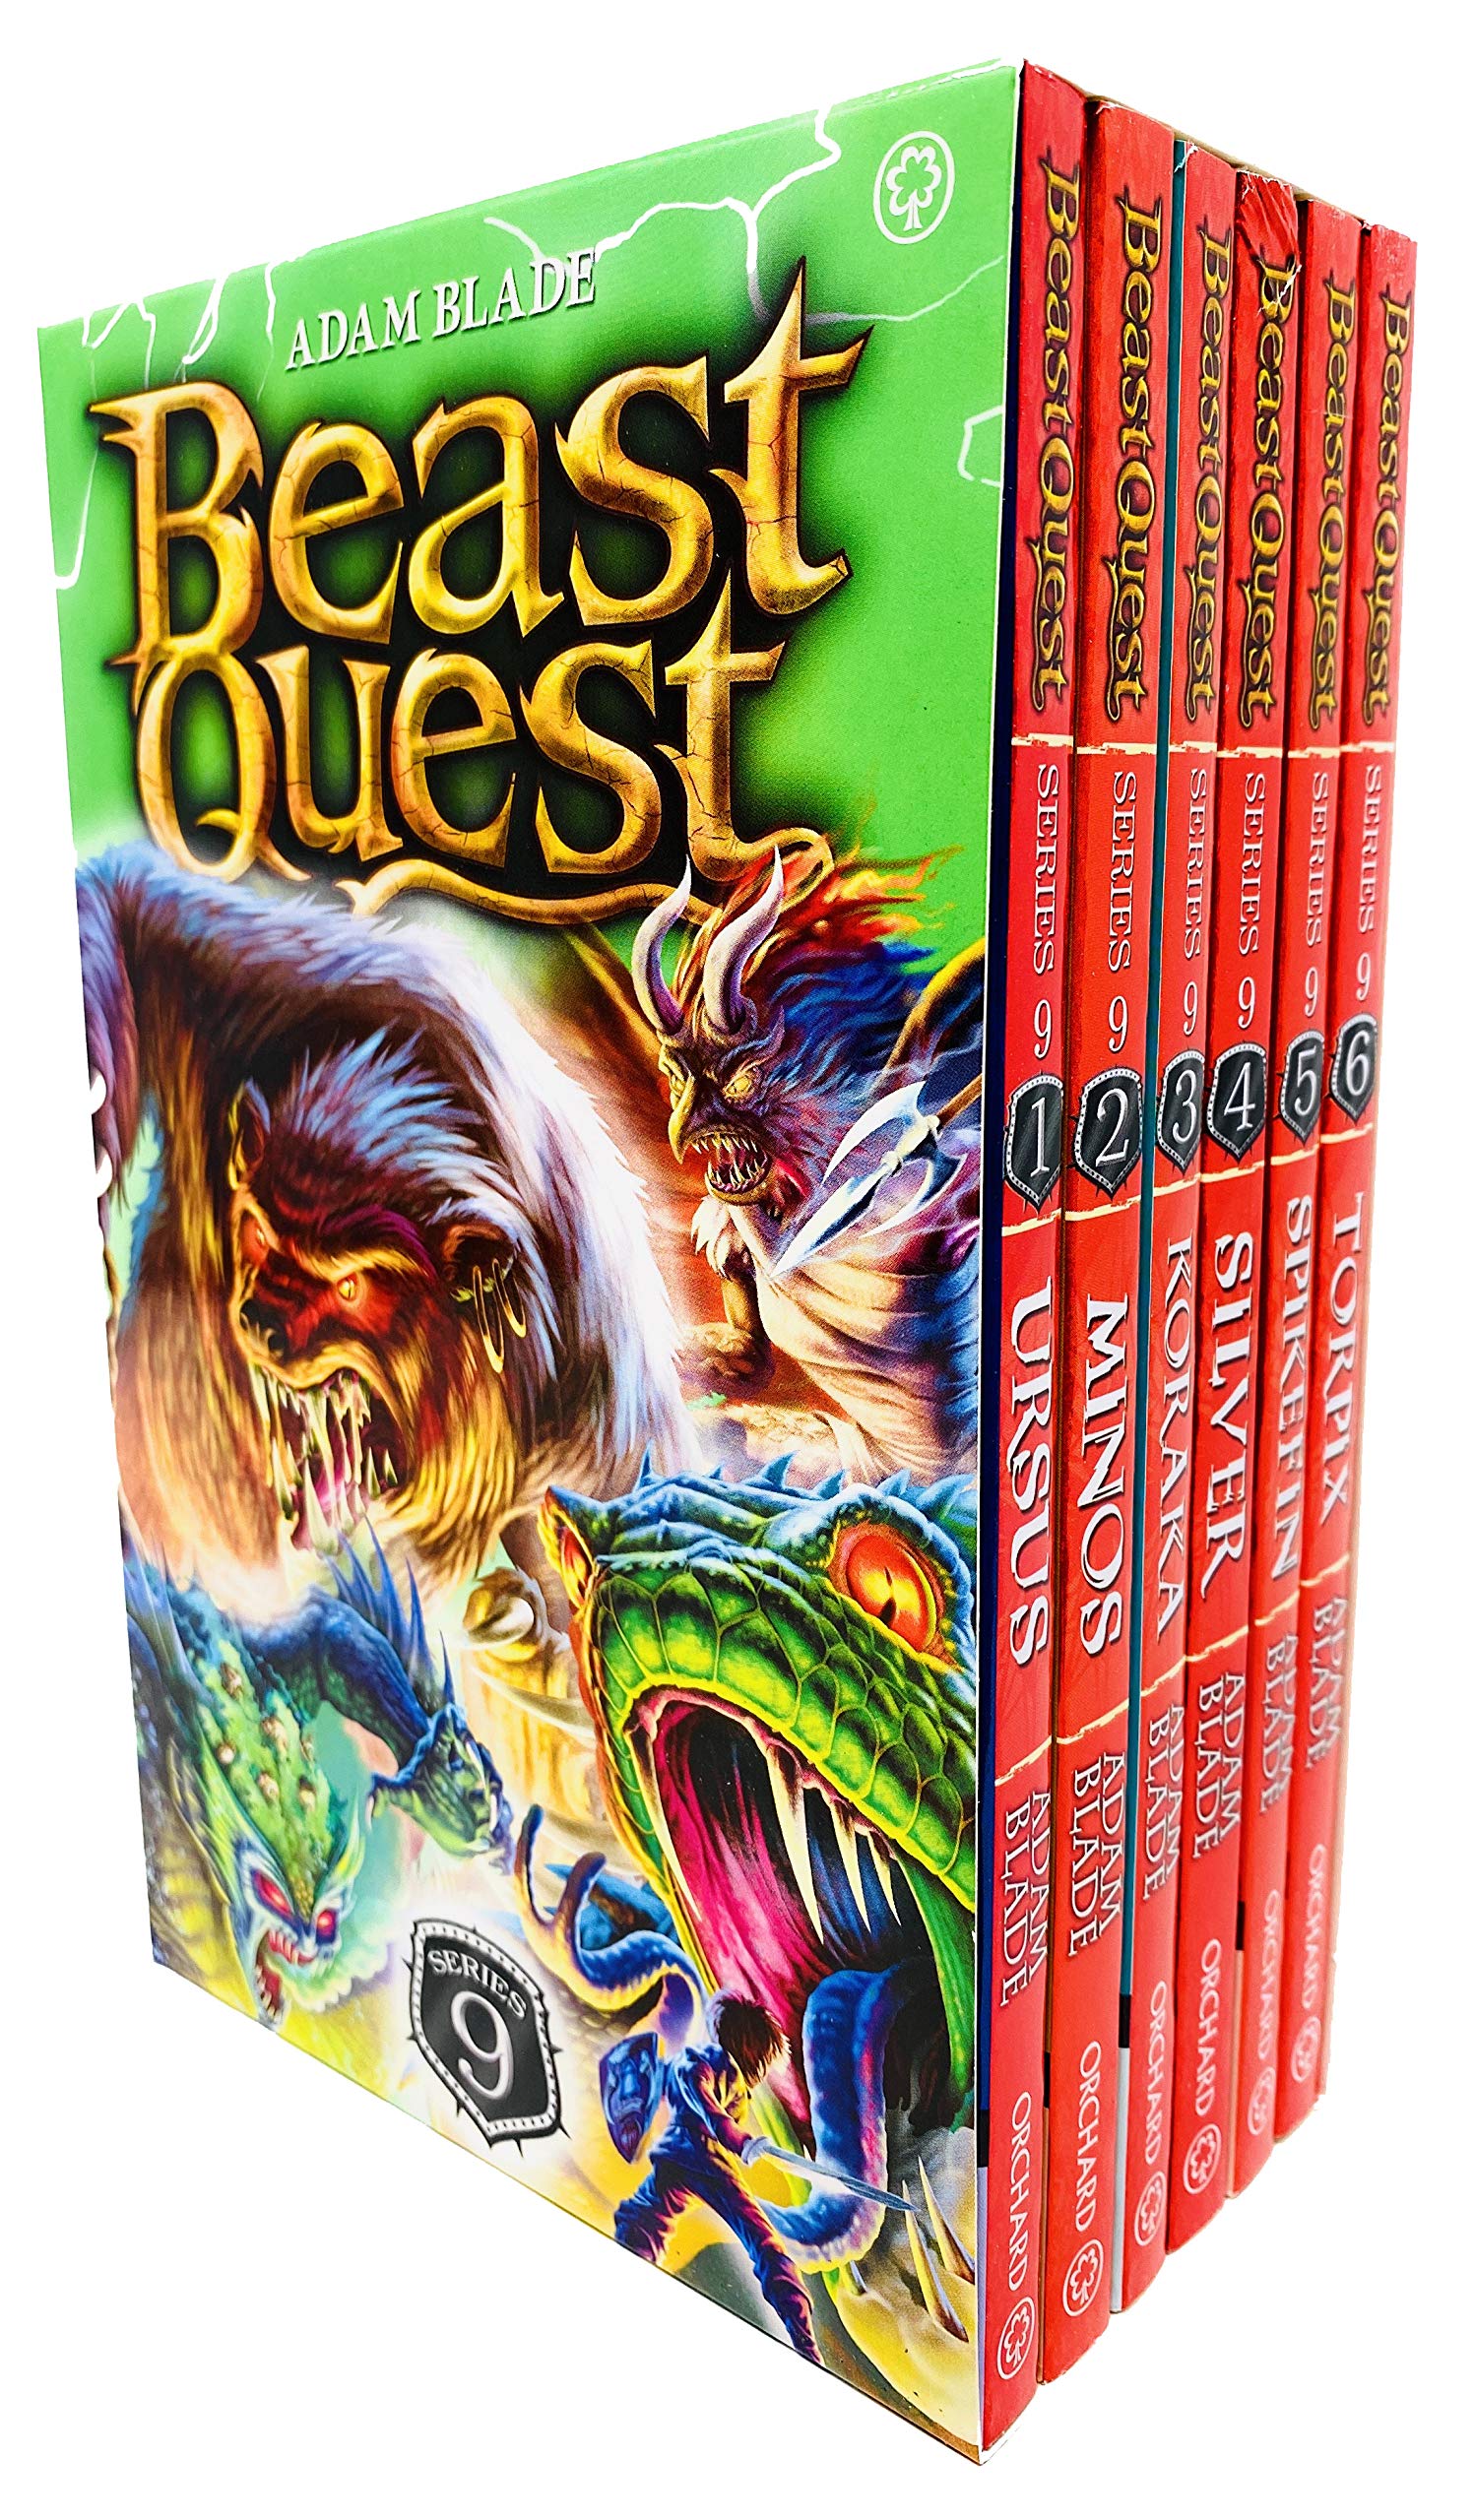 Beast Quest Series 9 Box Set Books 1-6 Collection (Koraka Winged Assassin, Silver Wild) - Lets Buy Books